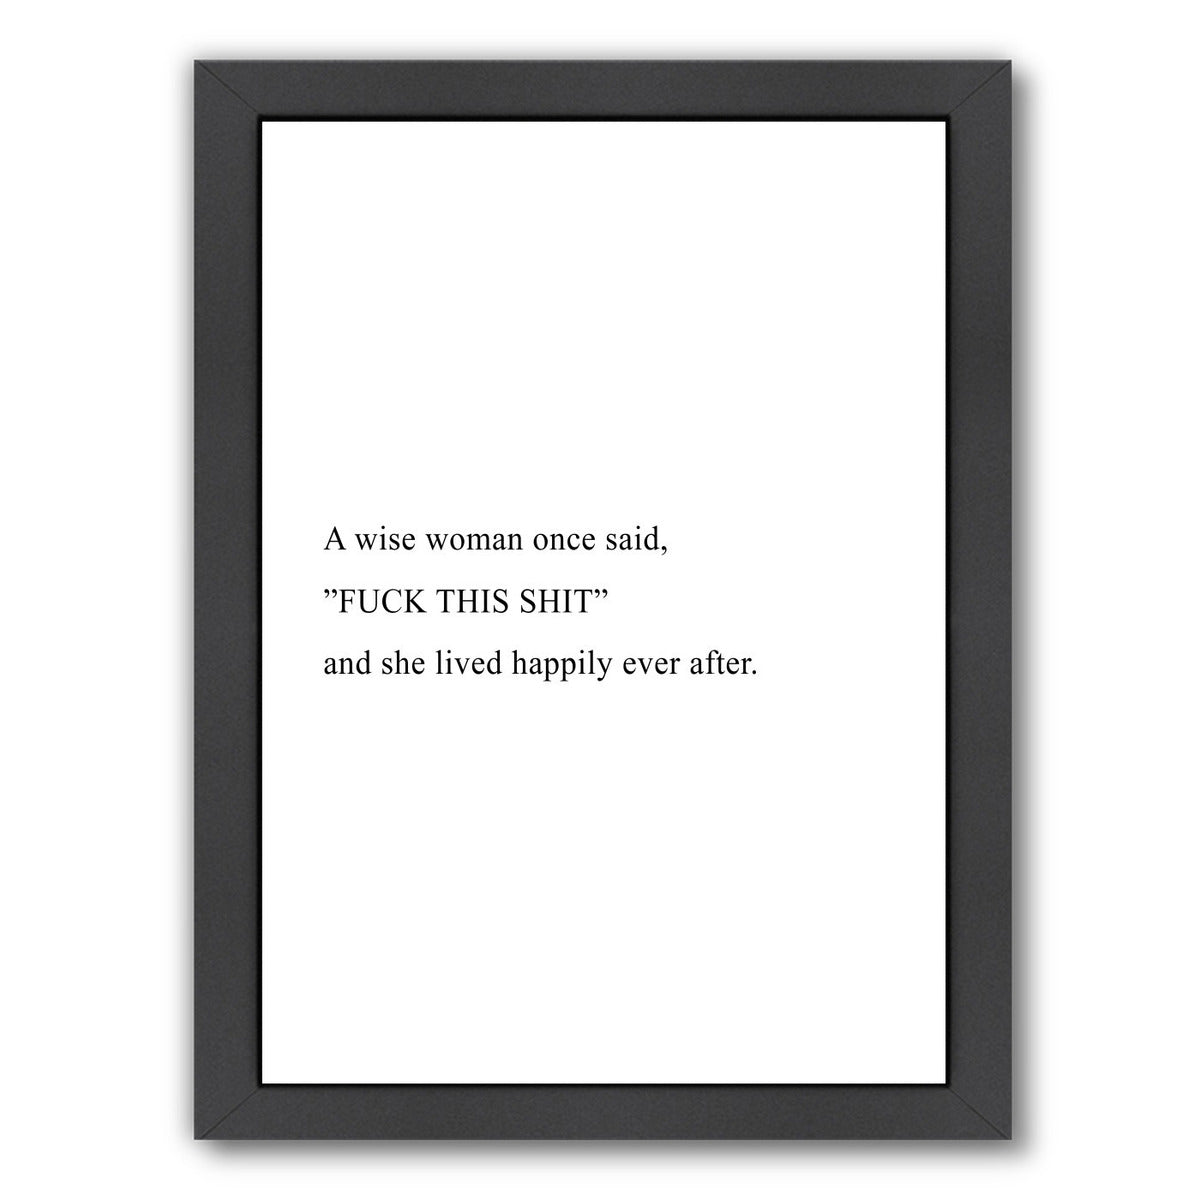 Wise Woman by Explicit Design Framed Print - Americanflat